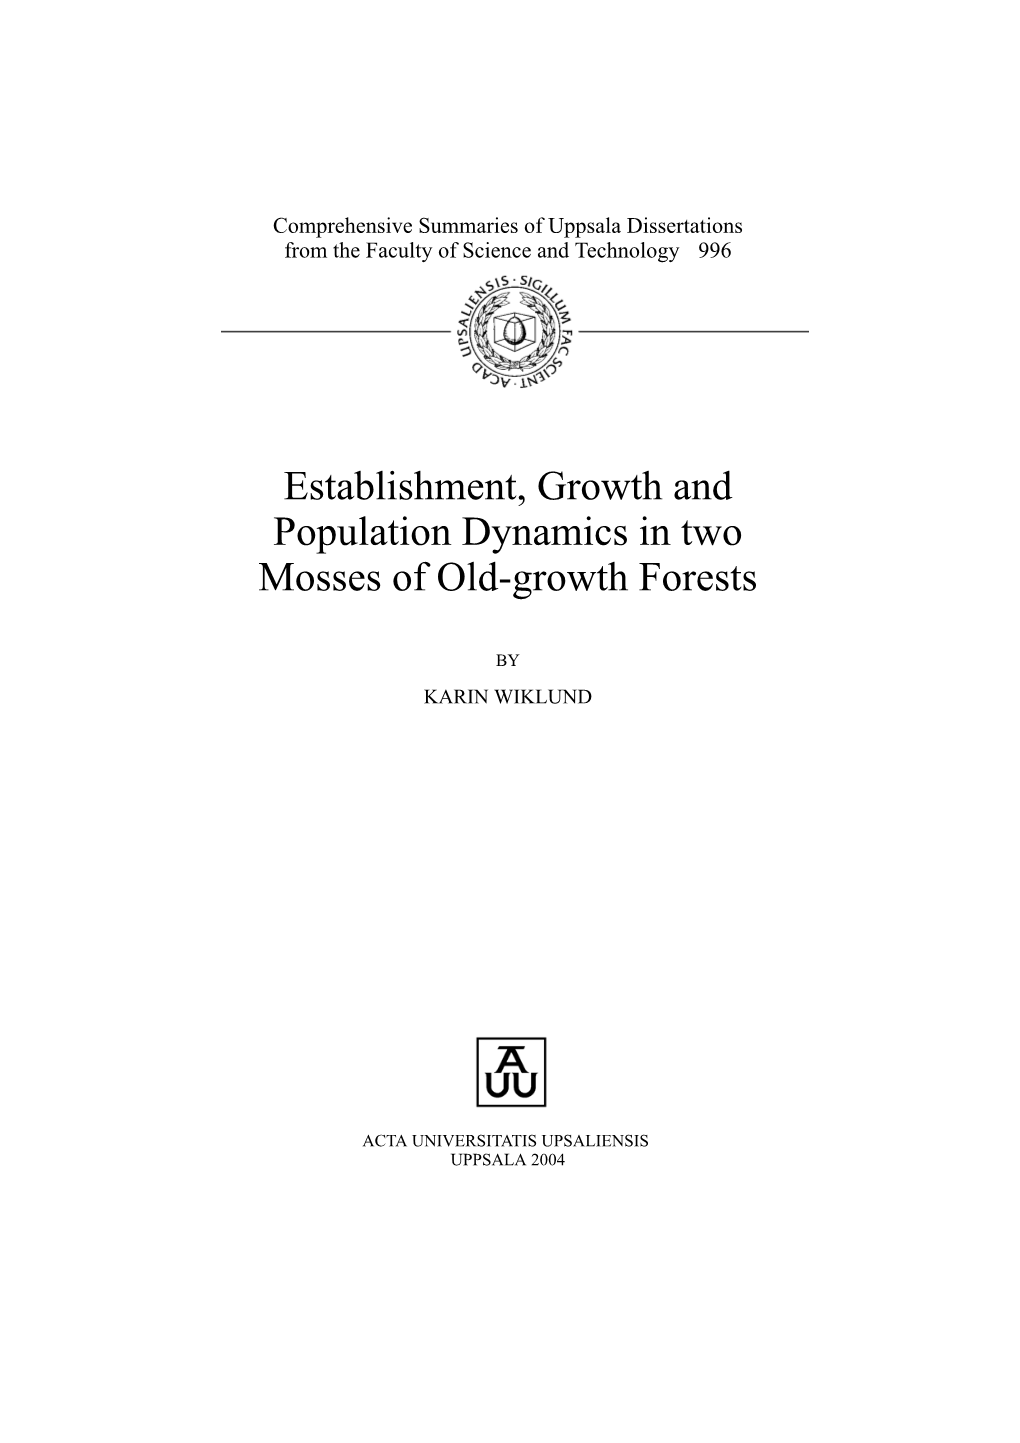 Establishment, Growth and Population Dynamics in Two Mosses of Old-Growth Forests